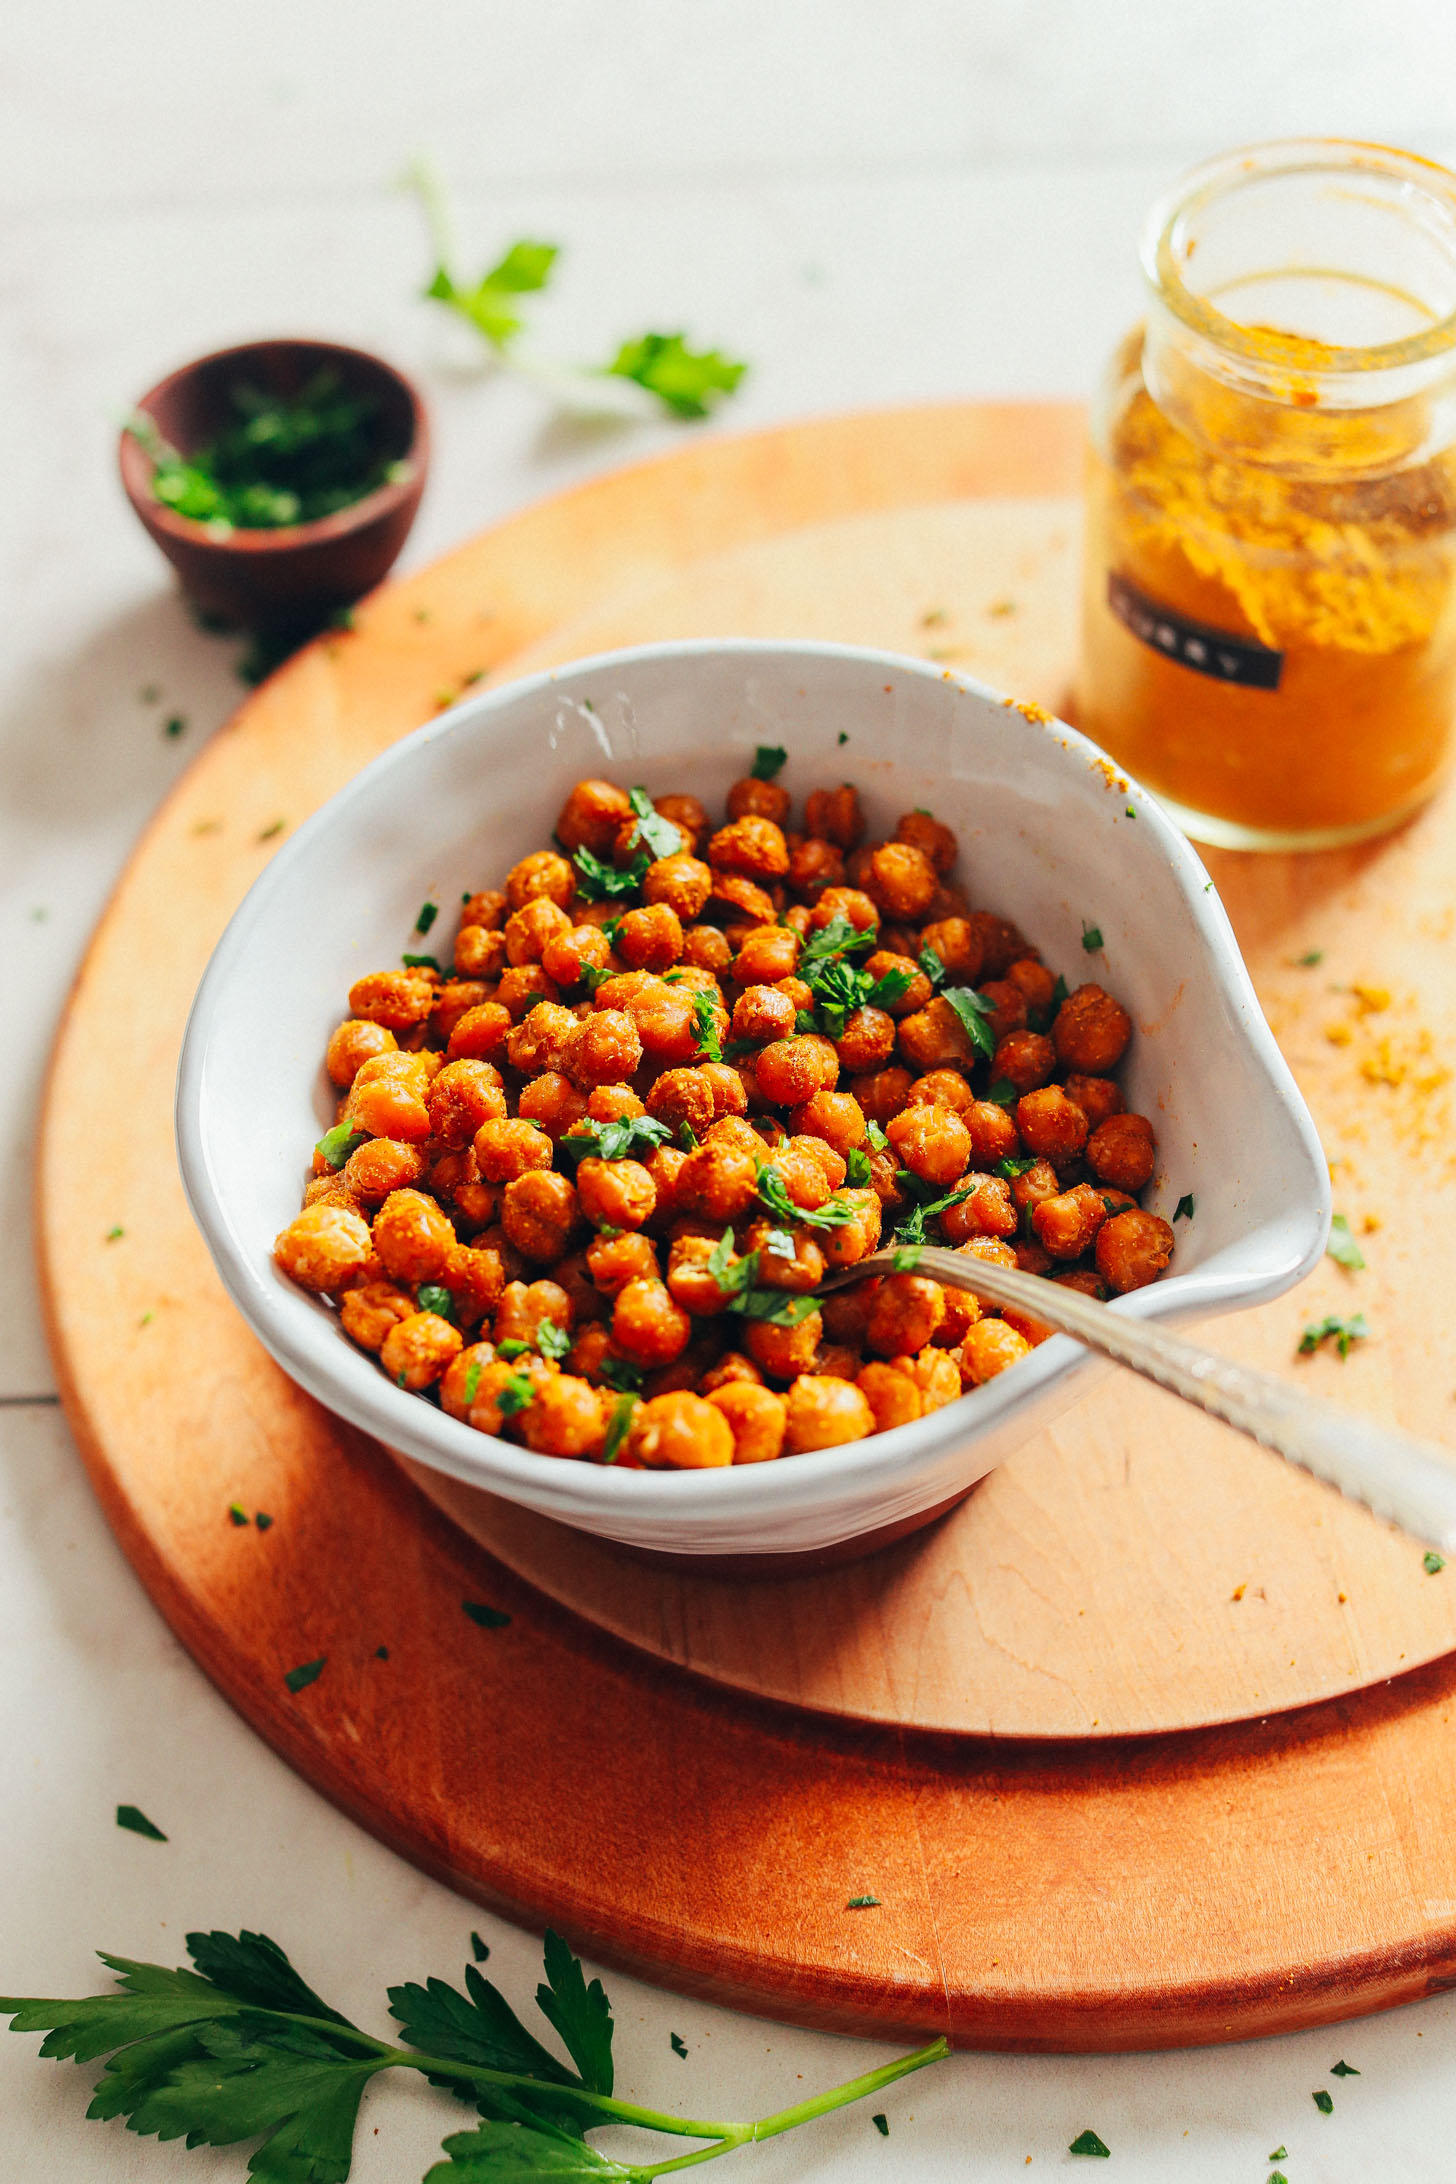 A wood cutting board with a bowl of Crispy Roasted Chickpeas alongside curry powder and fresh parsley